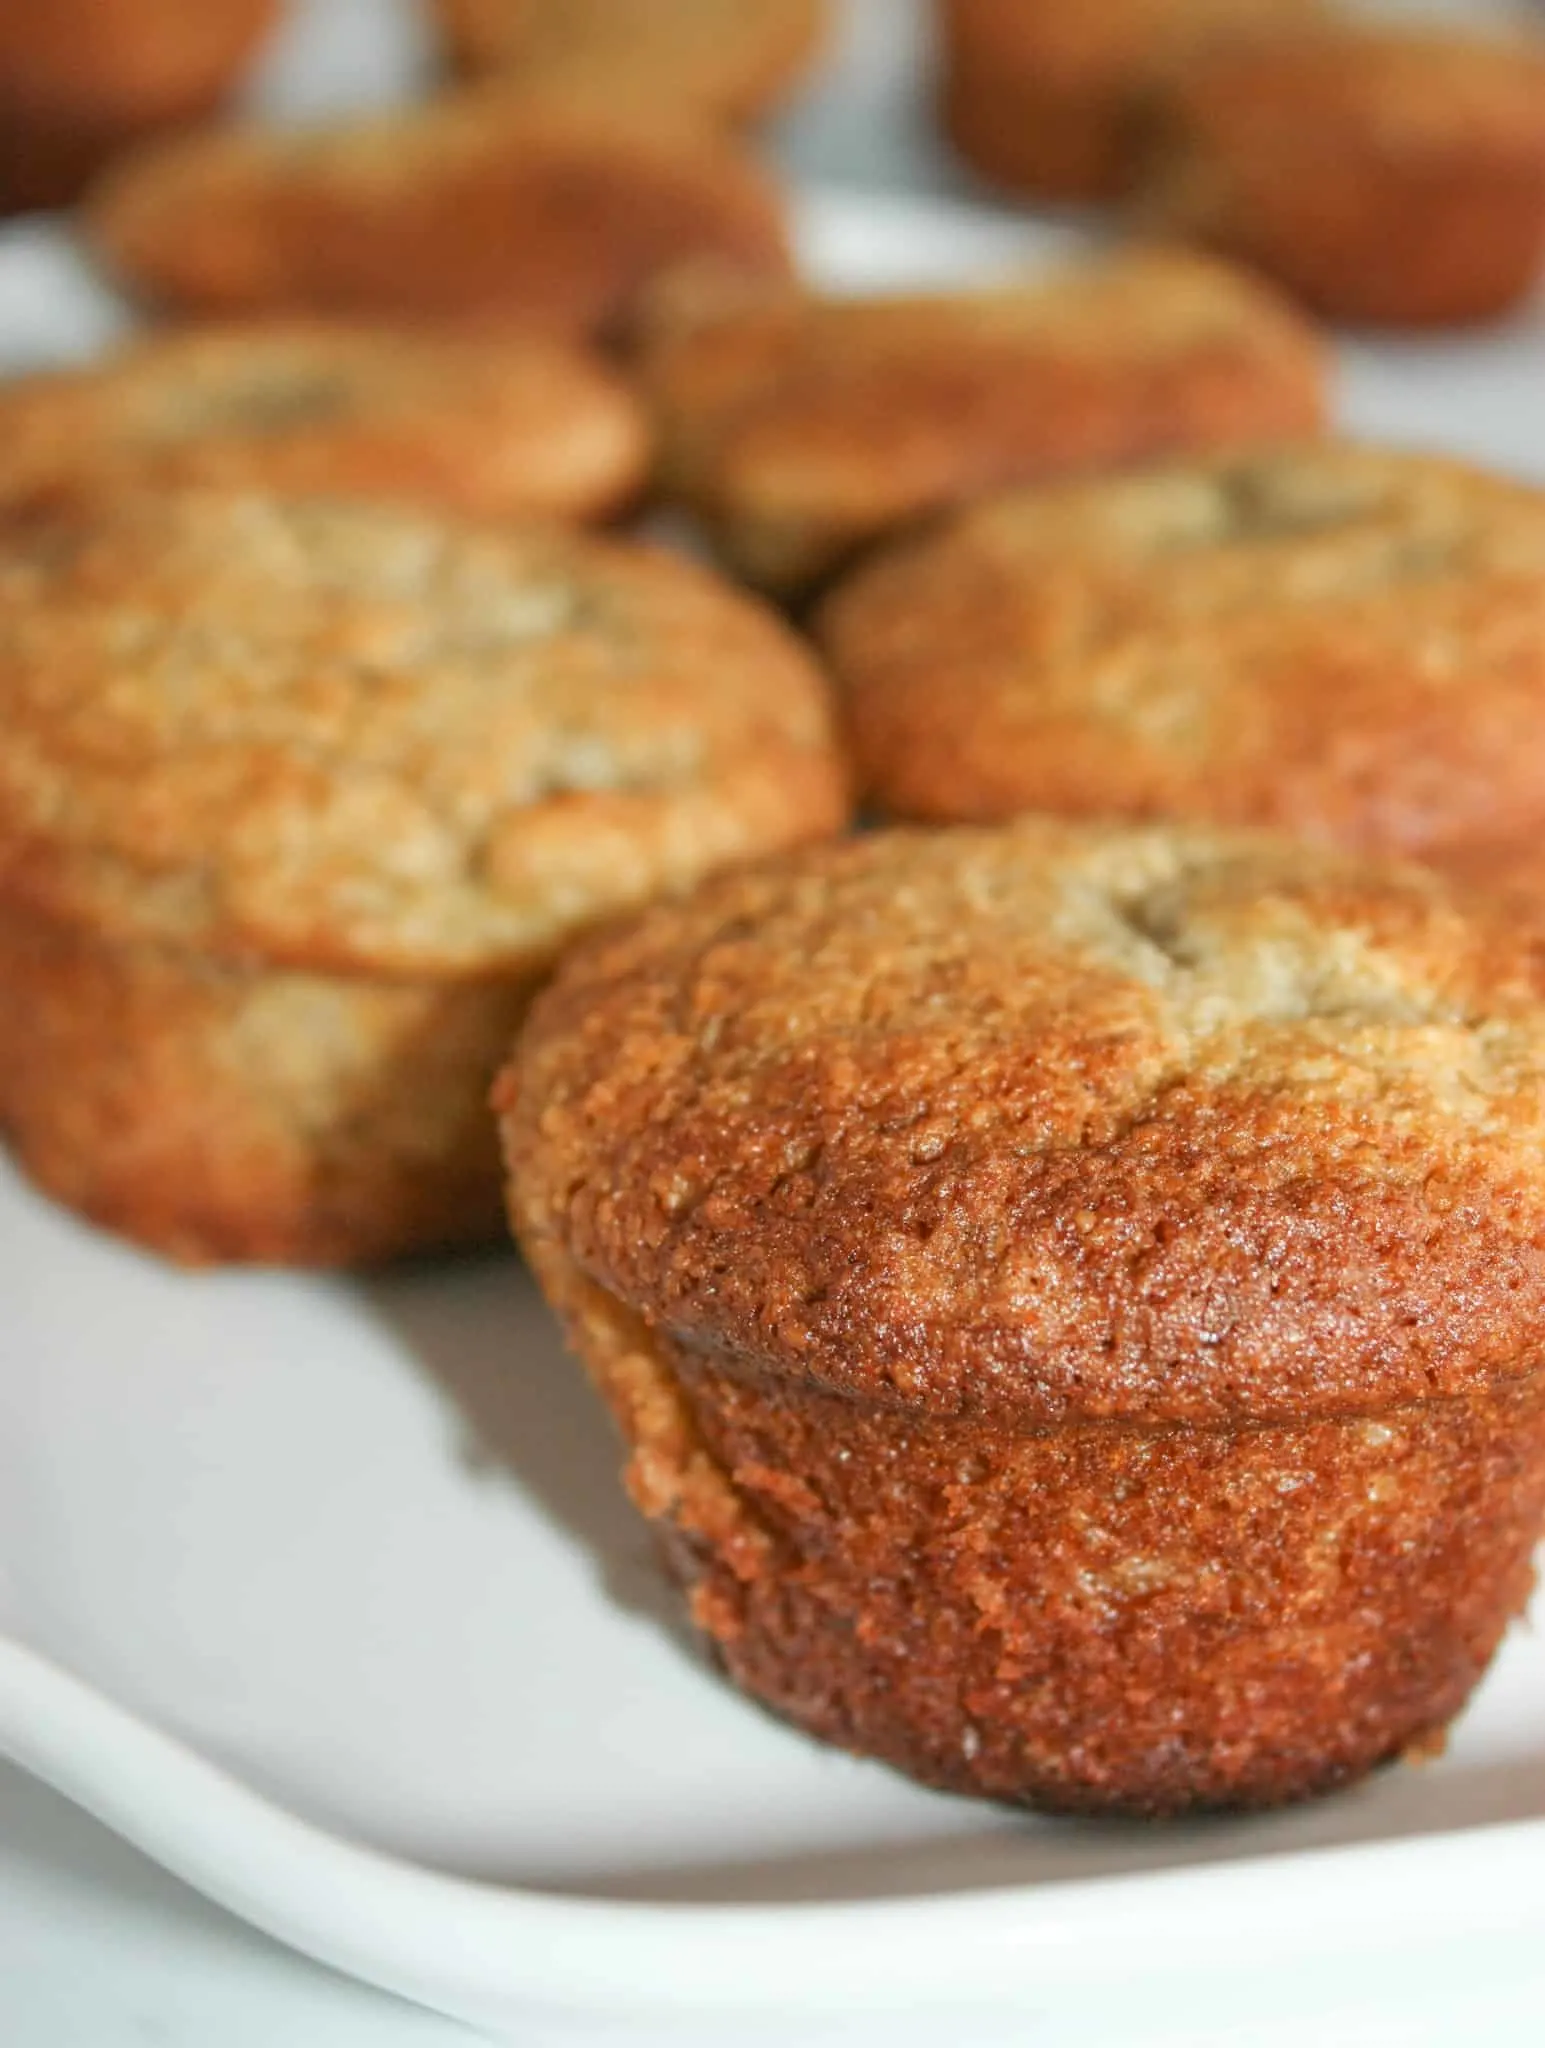 Almond Flour Banana Muffins are a nice moist snack or breakfast option.  These gluten free muffins are loaded with the goodness of almond flour and mashed banana.